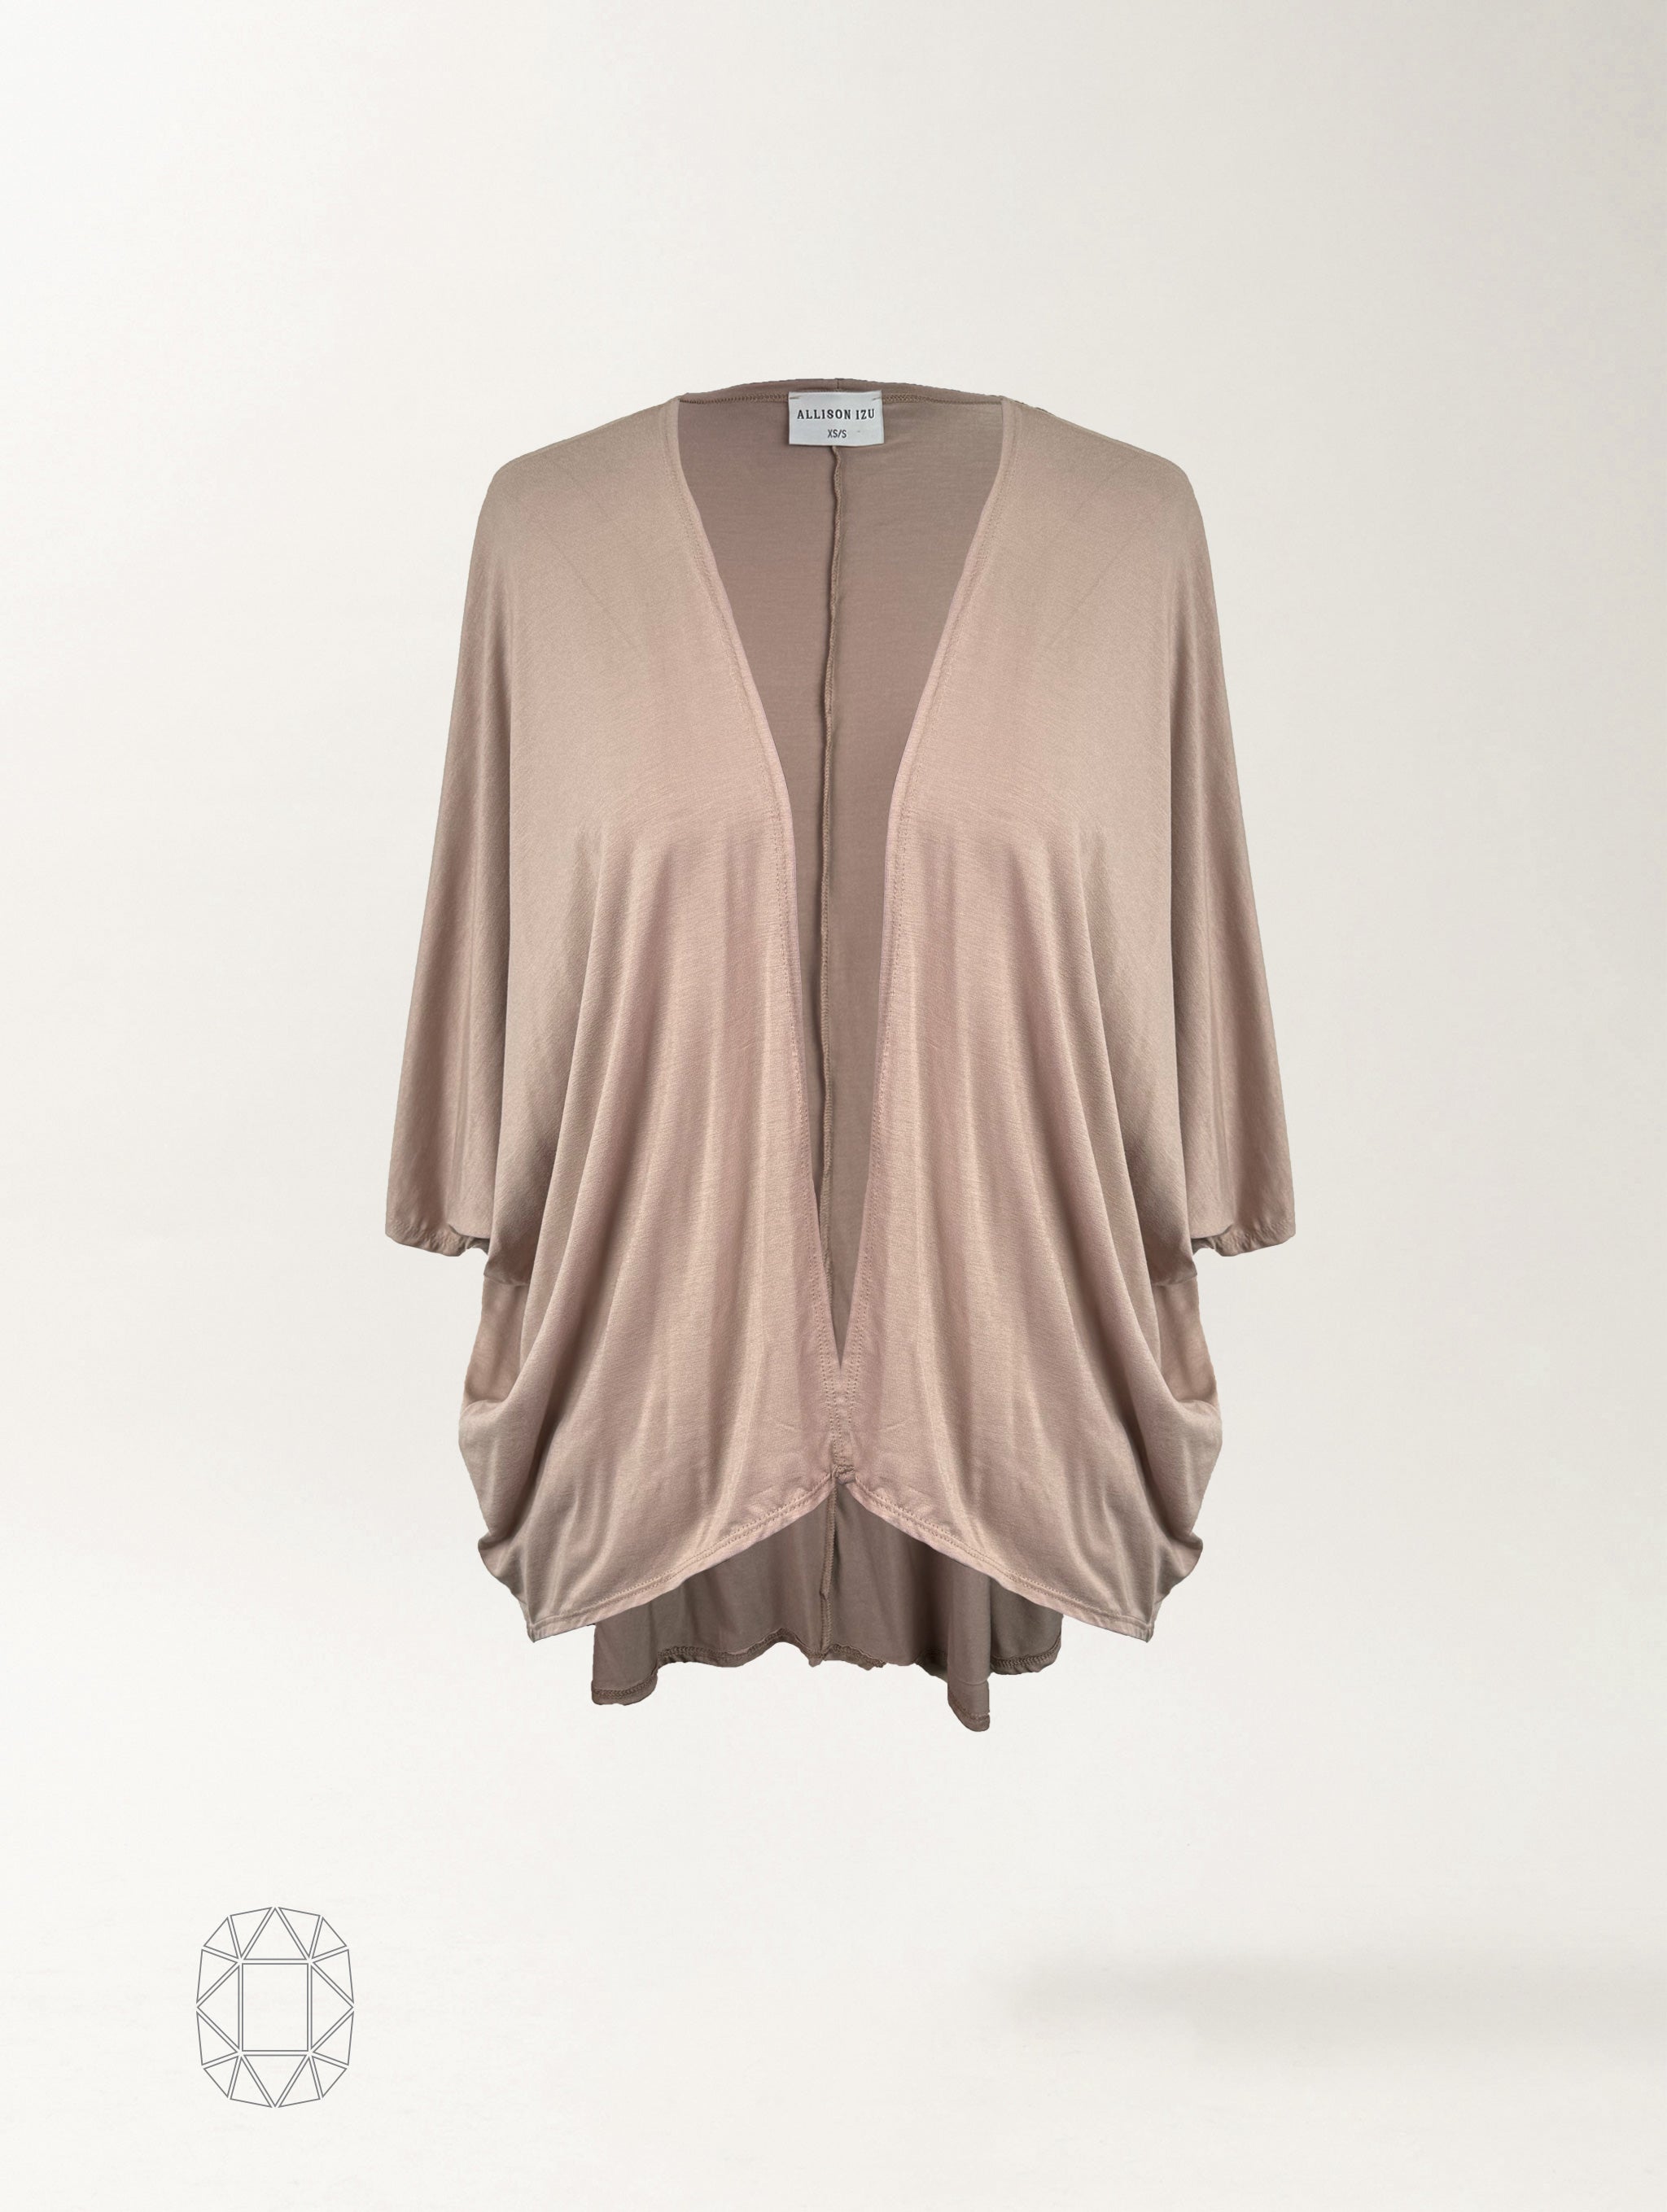 Joan Cover Up - Sandstone Rayon Jersey